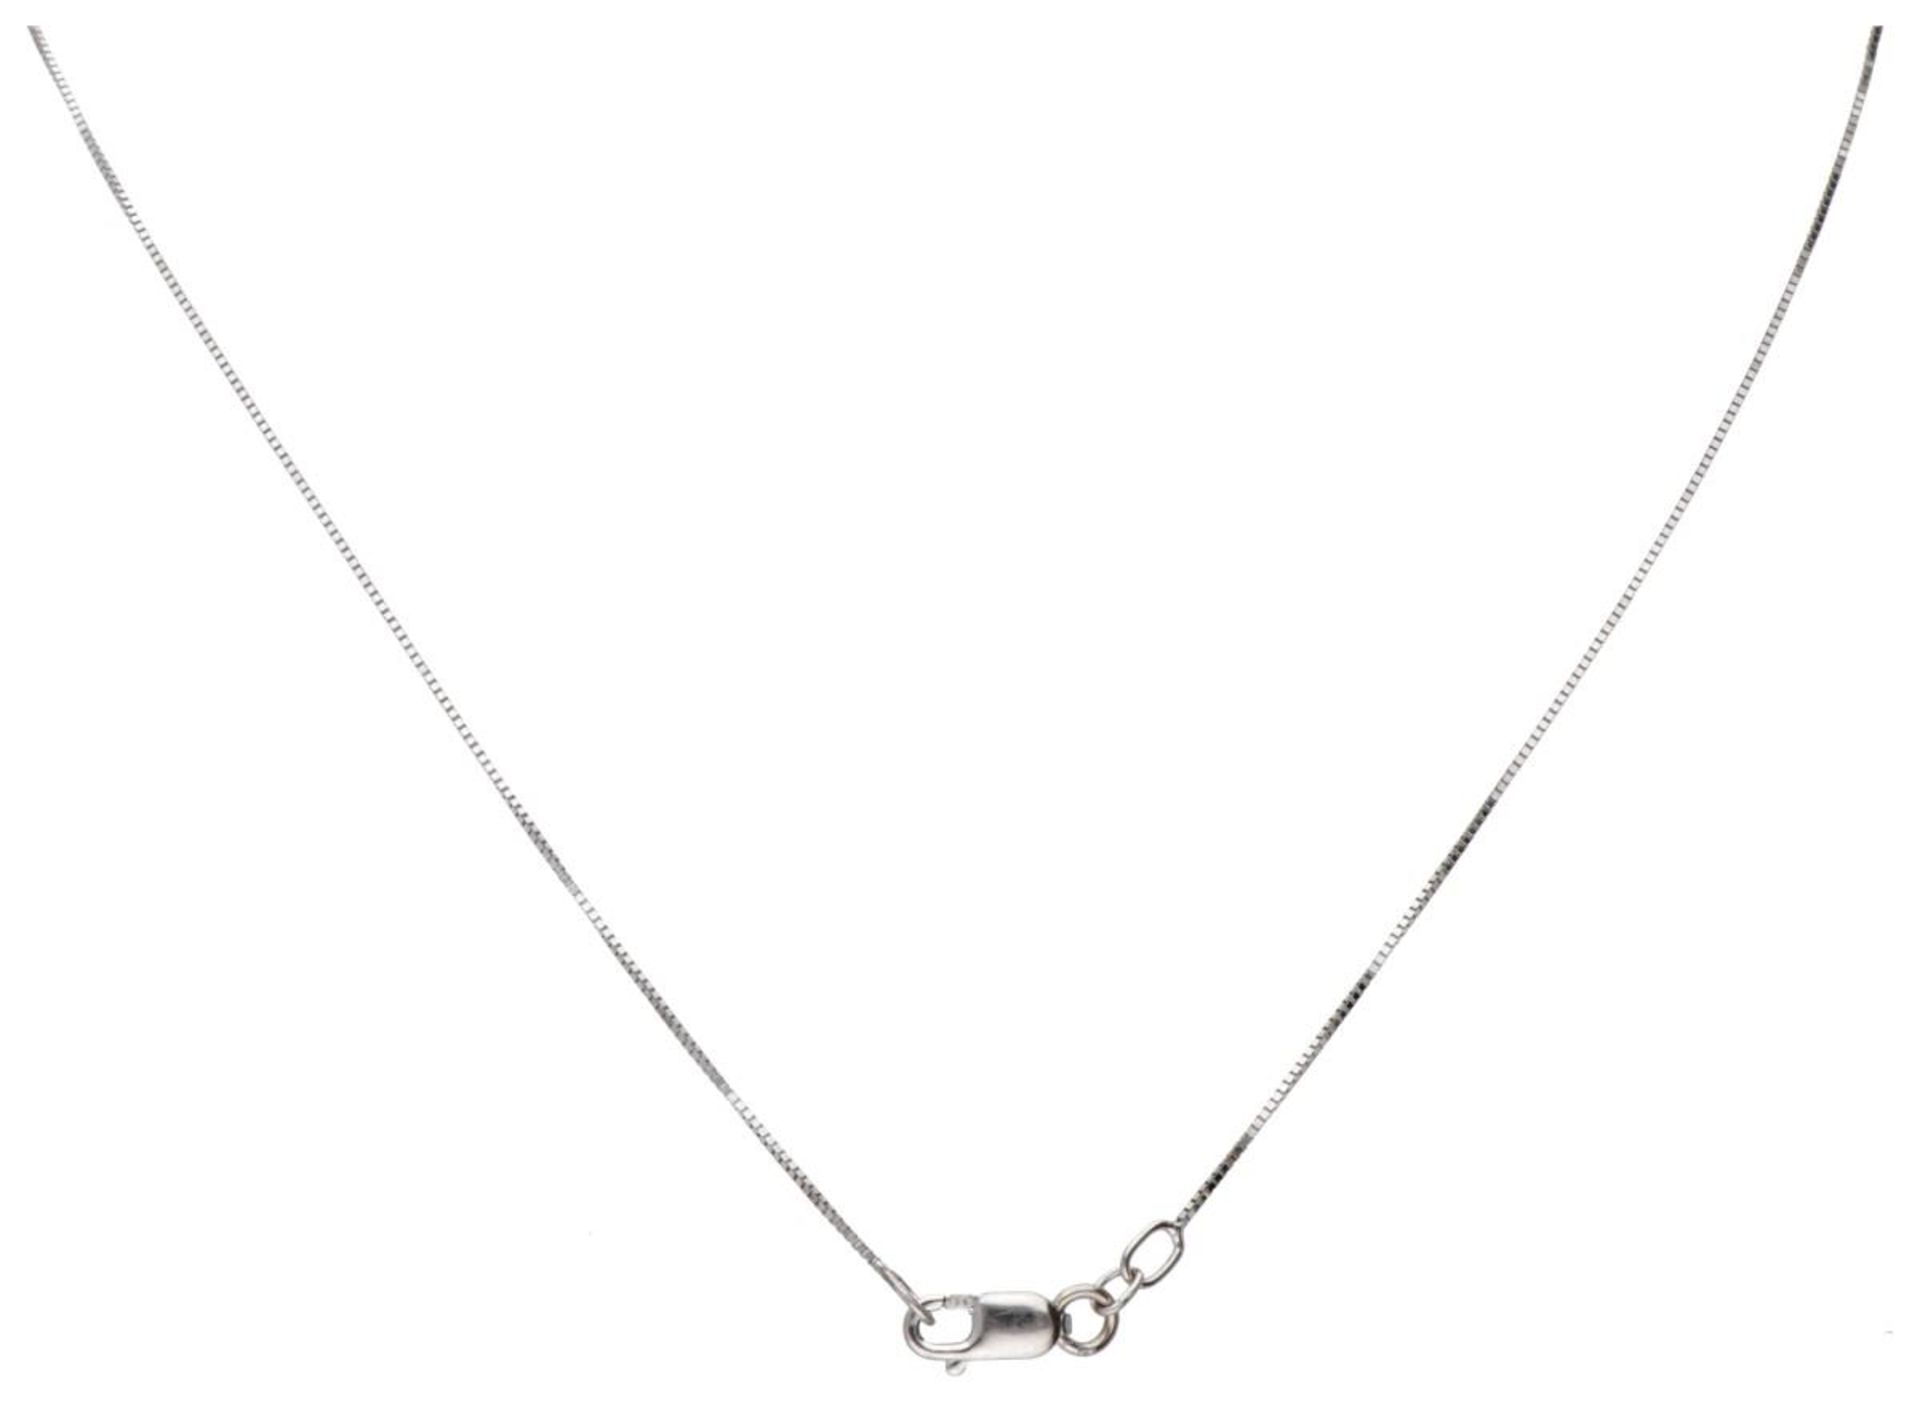 14K. White gold necklace with cluster pendant set with approx. 0.50 ct. diamond. - Image 5 of 6